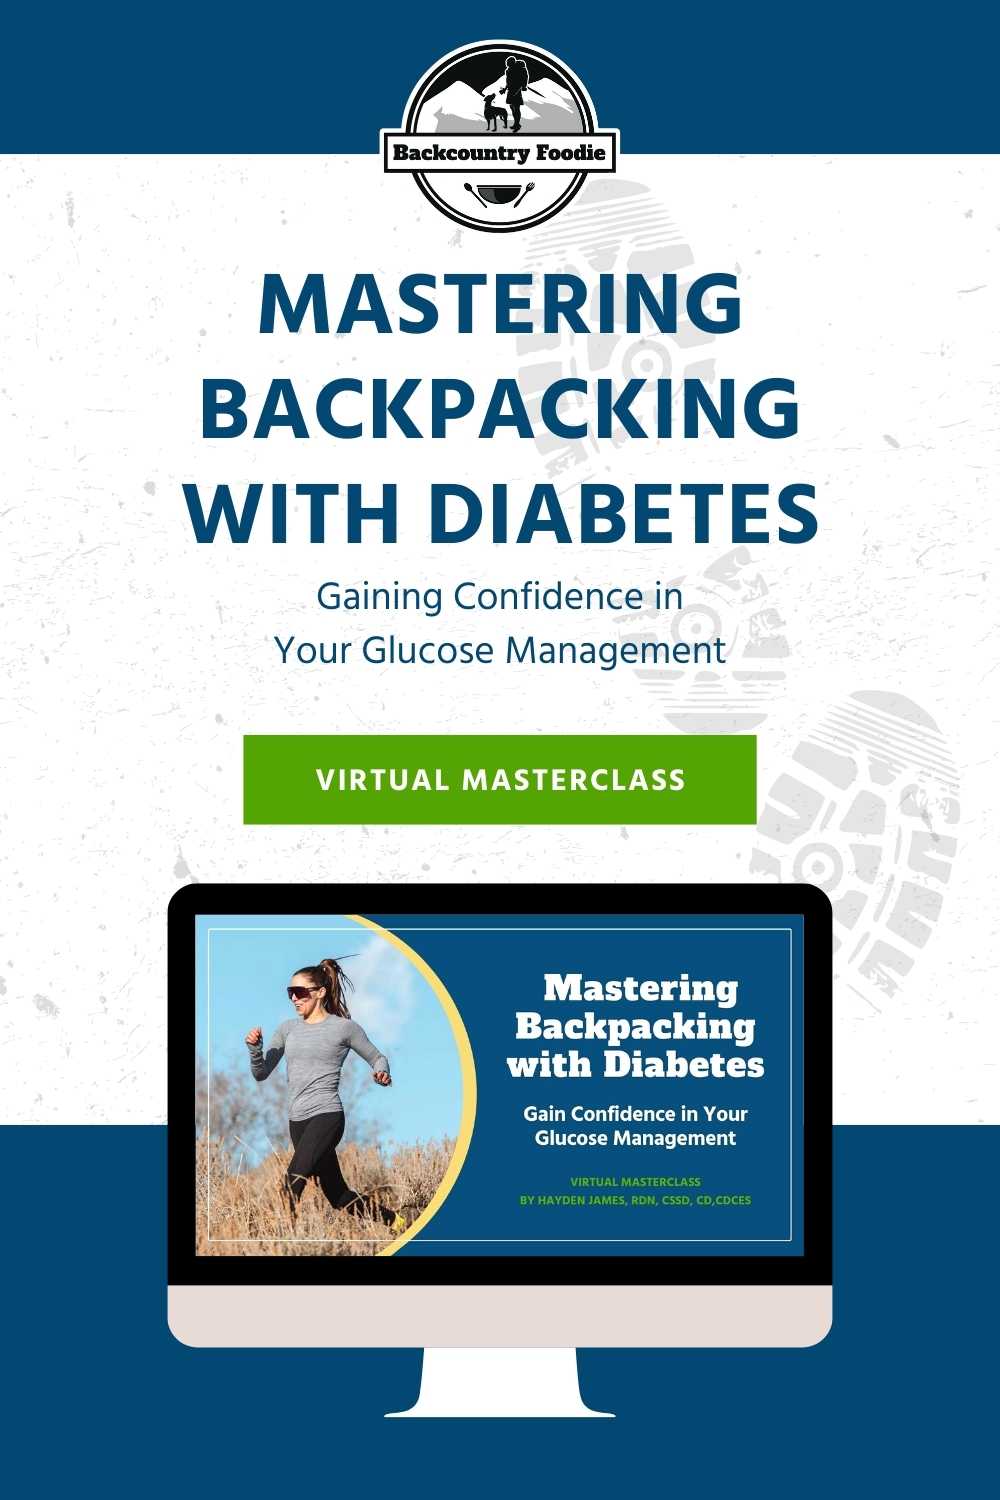 Have you struggled with managing your diabetes while backpacking? If you said yes, this class is for you! Hayden James, outdoor adventure-loving dietitian and certified diabetes educator, has worked with hundreds of individuals living with diabetes. You'll leave the virtual masterclass with a plan in place to master backpacking with diabetes! #backpackingwithdiabetes #hikingwithdiabetes #hypoglycemiawhilehiking #offgridwithdiabetes #backcountryfoodie